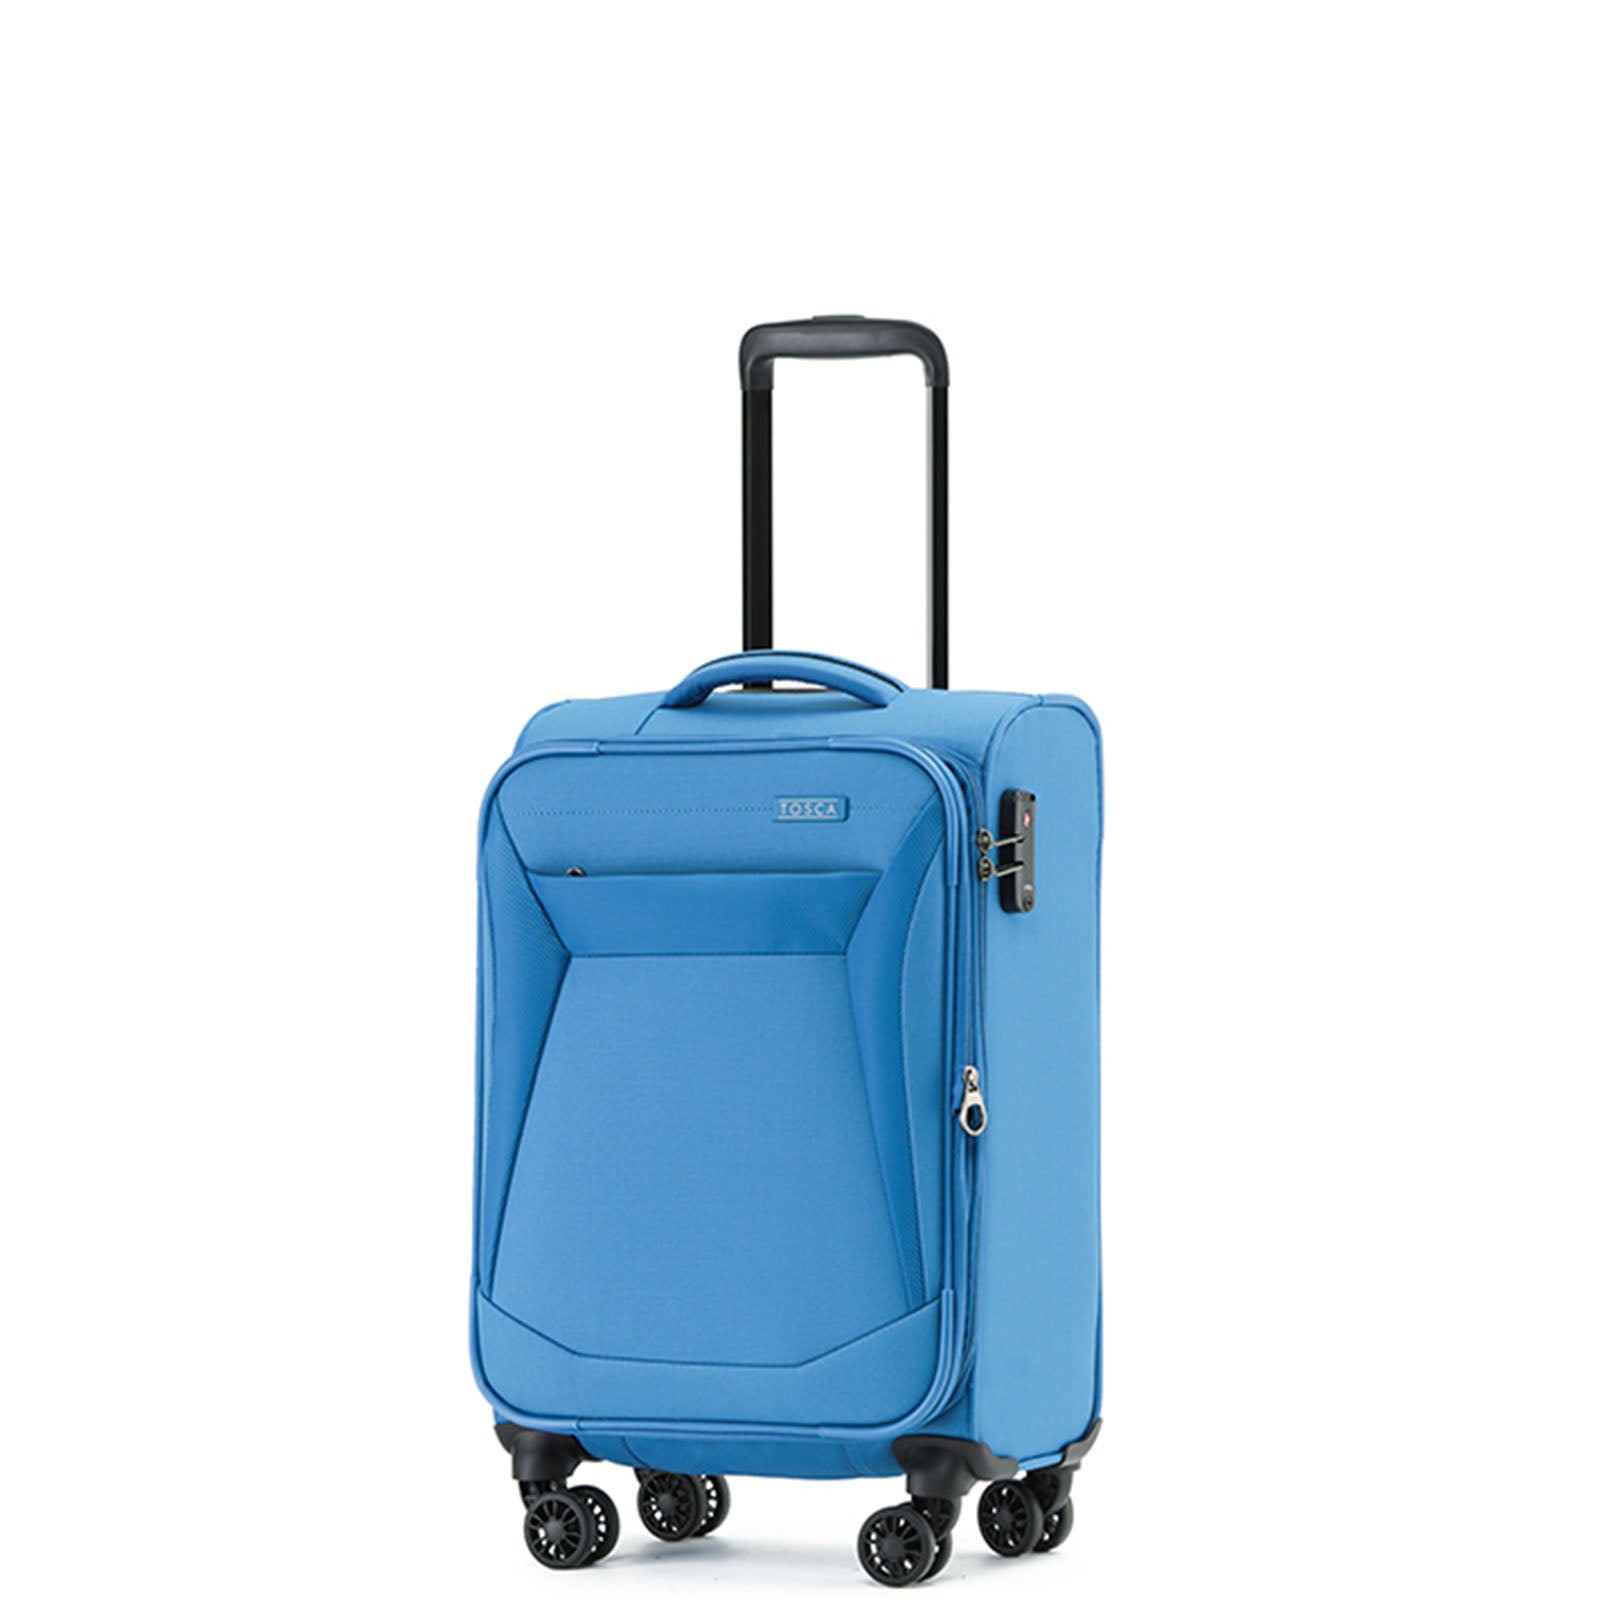 Tosca-Aviator-4-Wheel-Carry-On-Suitcase-Blue-Front-Angle